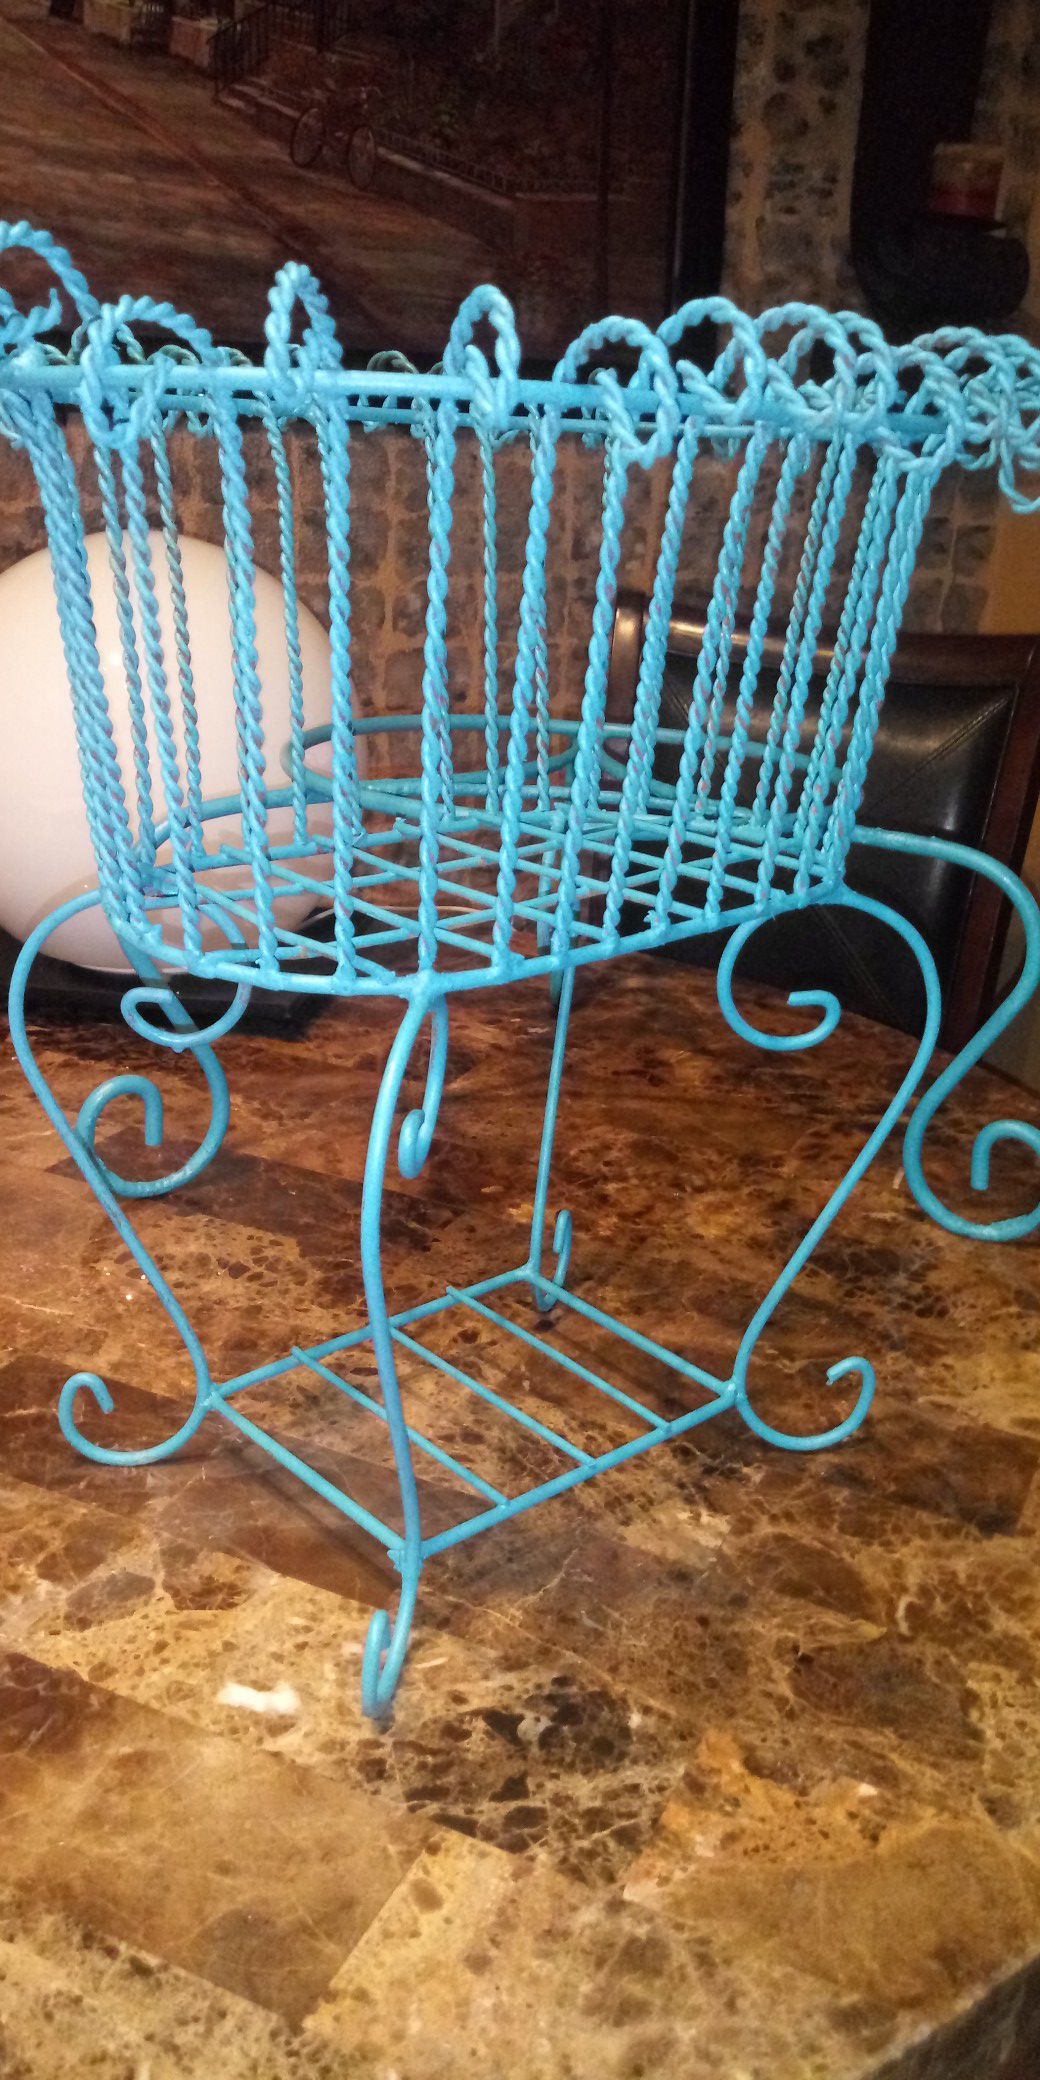 Turquoise plant stands